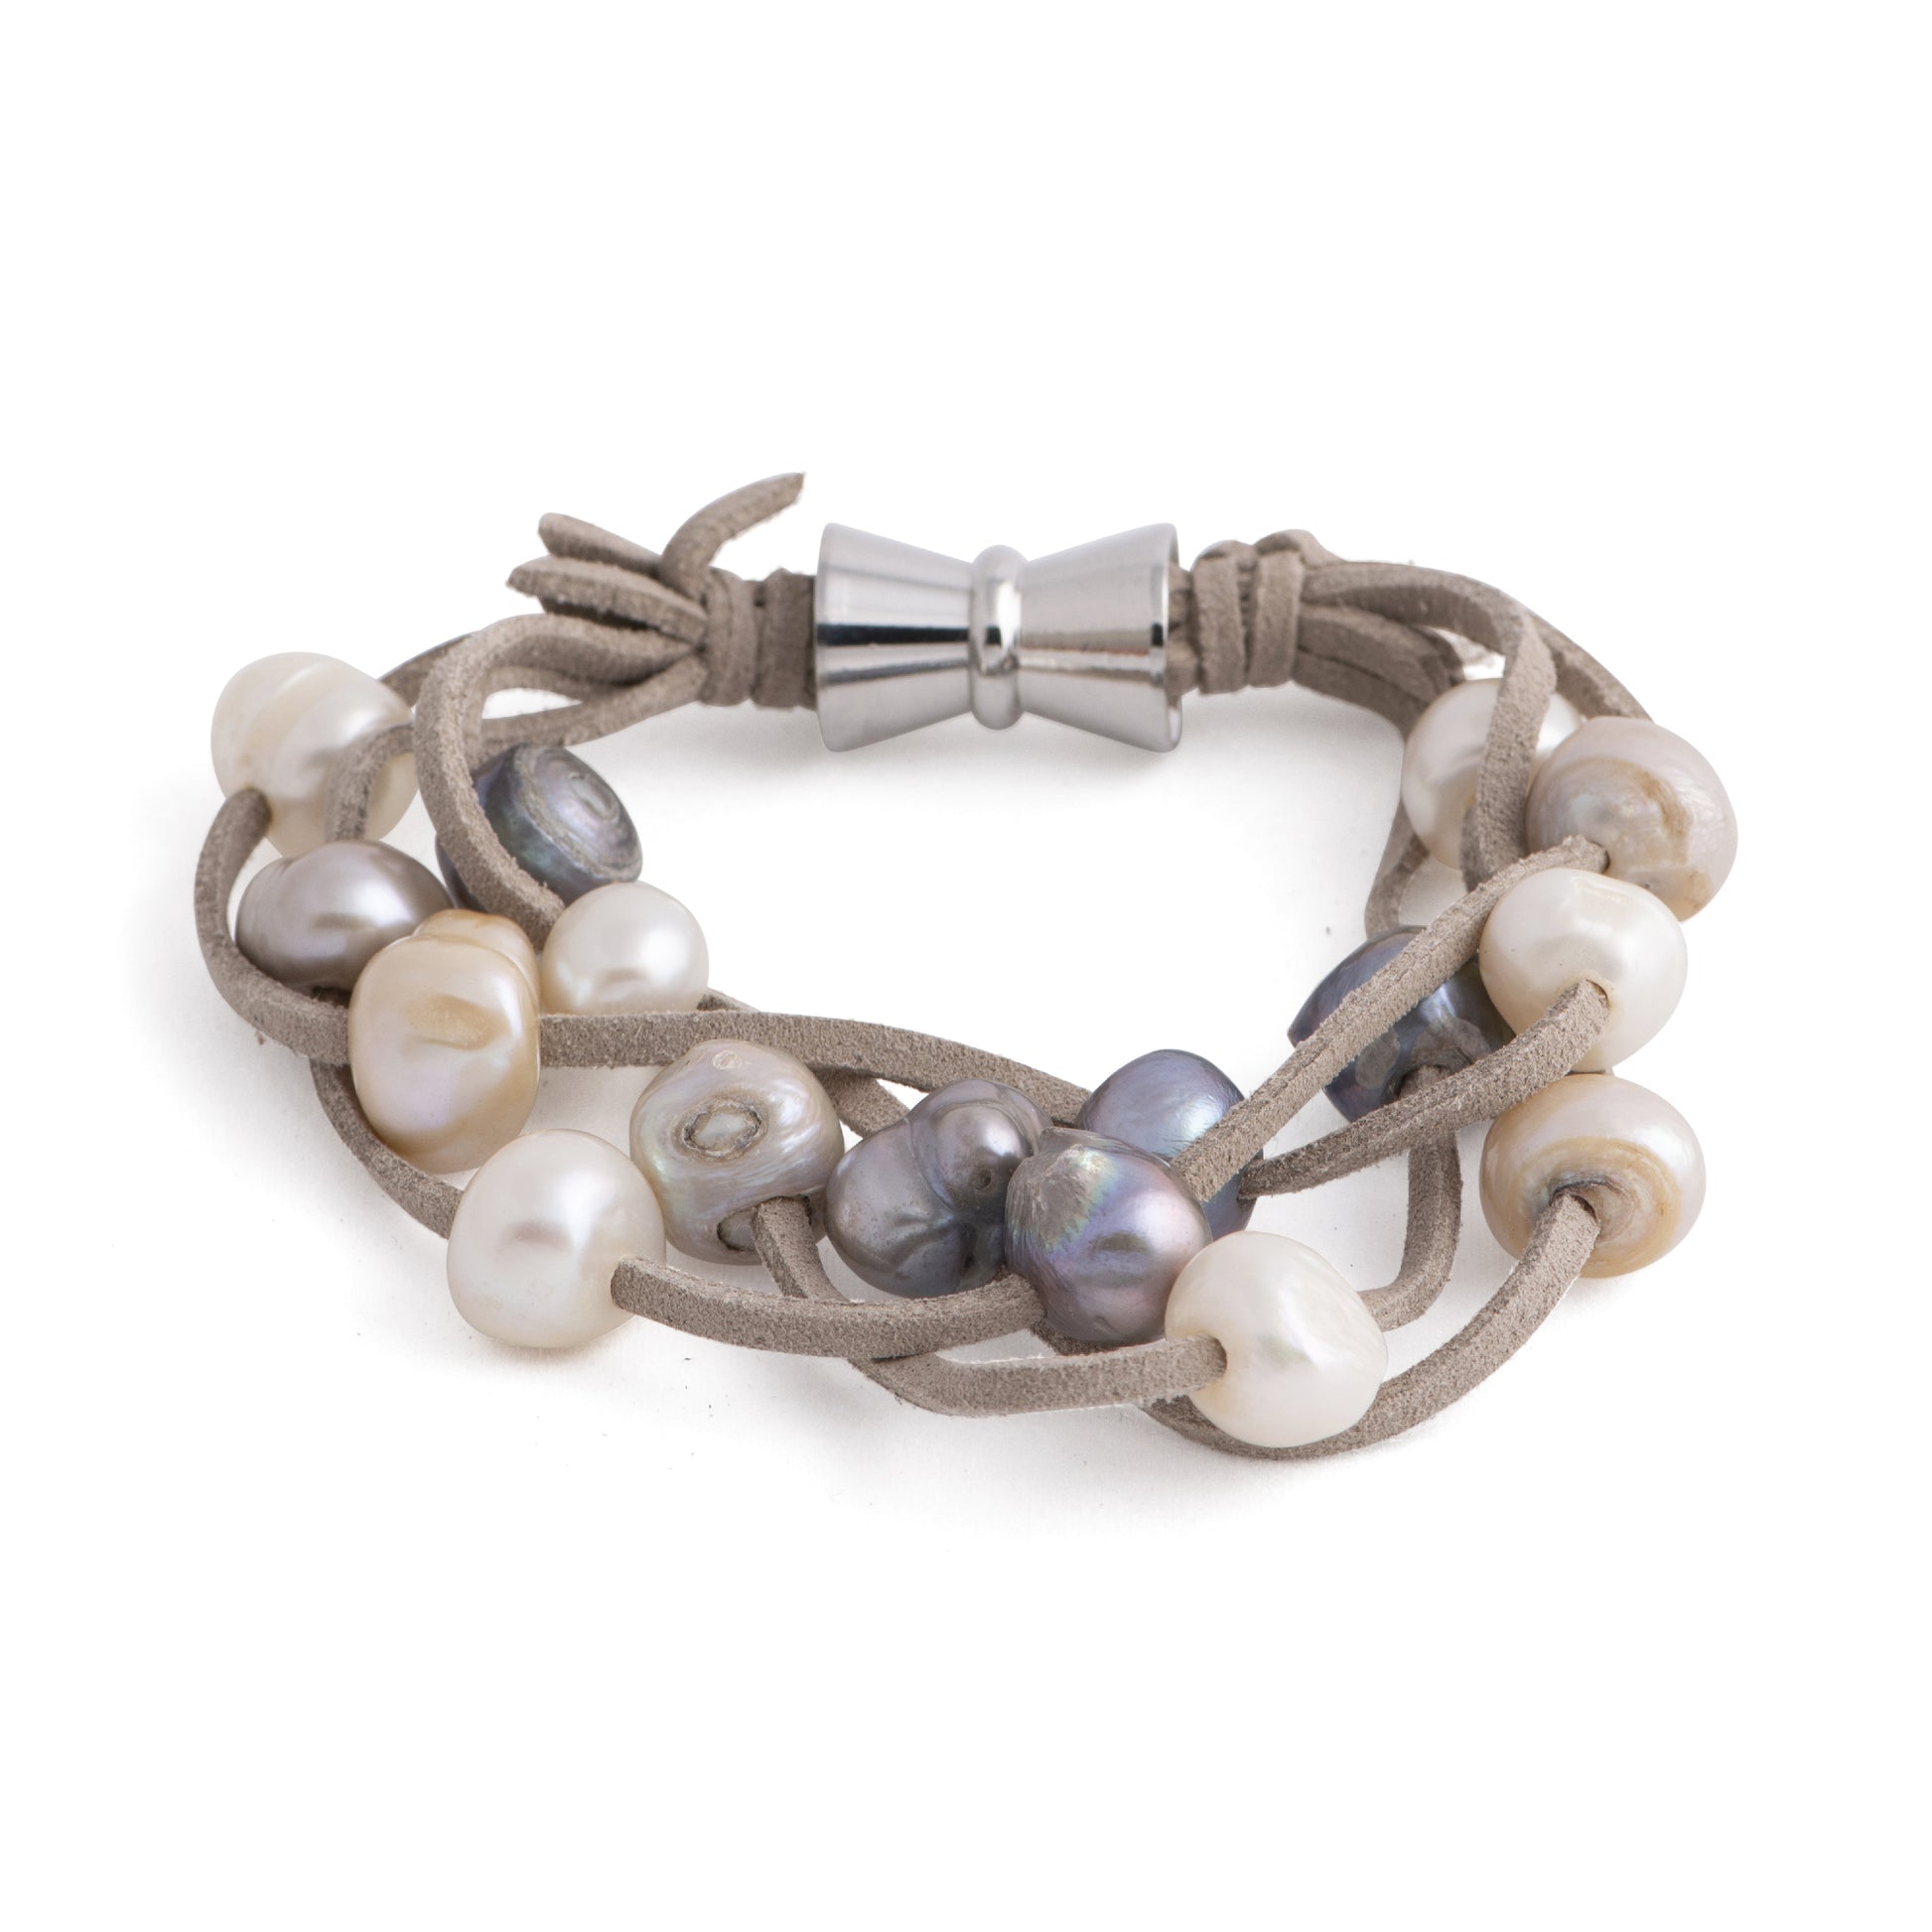 Bengal - Suede multi-layer bracelet with freshwater pearls and magnetic clasp (Light grey suede, multicolor pearls)